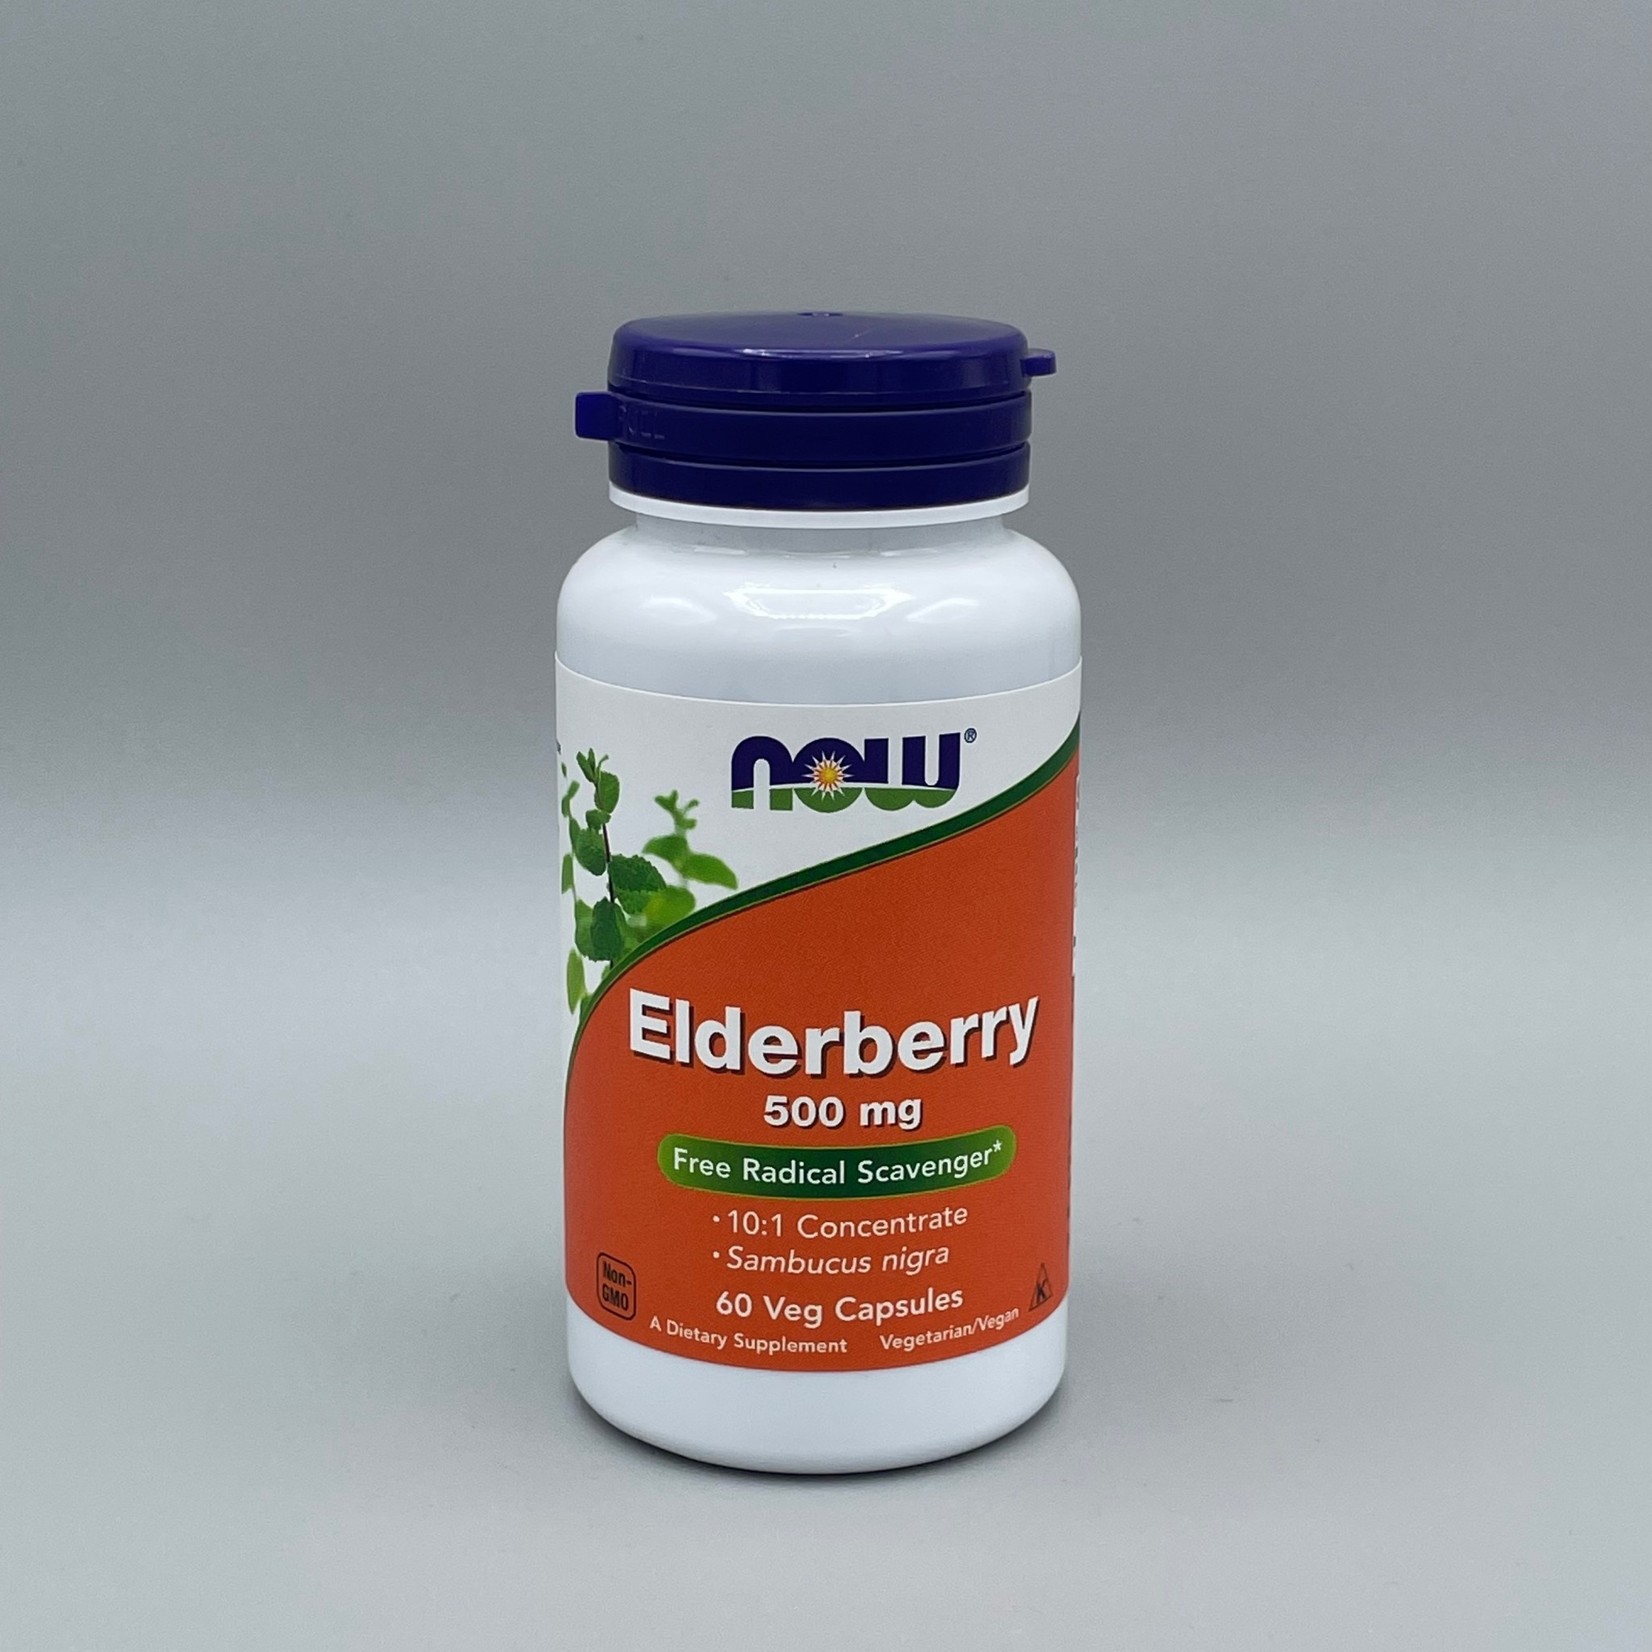 NOW NOW Elderberry (10:1 Concentrate) - 500 mg, 60 Veg. Capsules